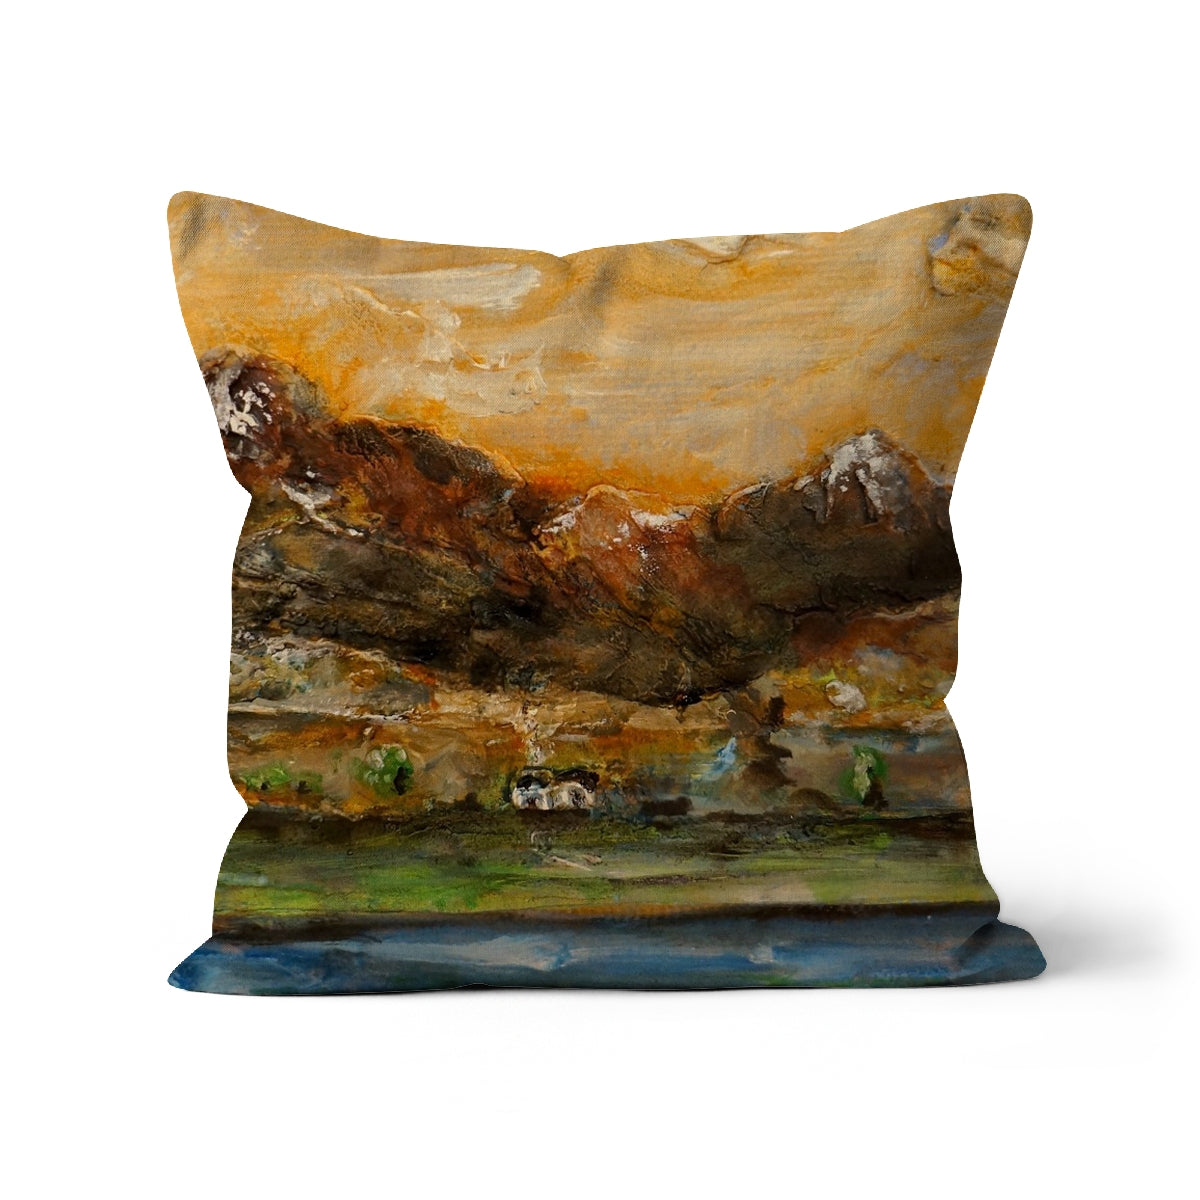 A Glencoe Cottage Art Gifts Cushion-Cushions-Glencoe Art Gallery-Faux Suede-24"x24"-Paintings, Prints, Homeware, Art Gifts From Scotland By Scottish Artist Kevin Hunter